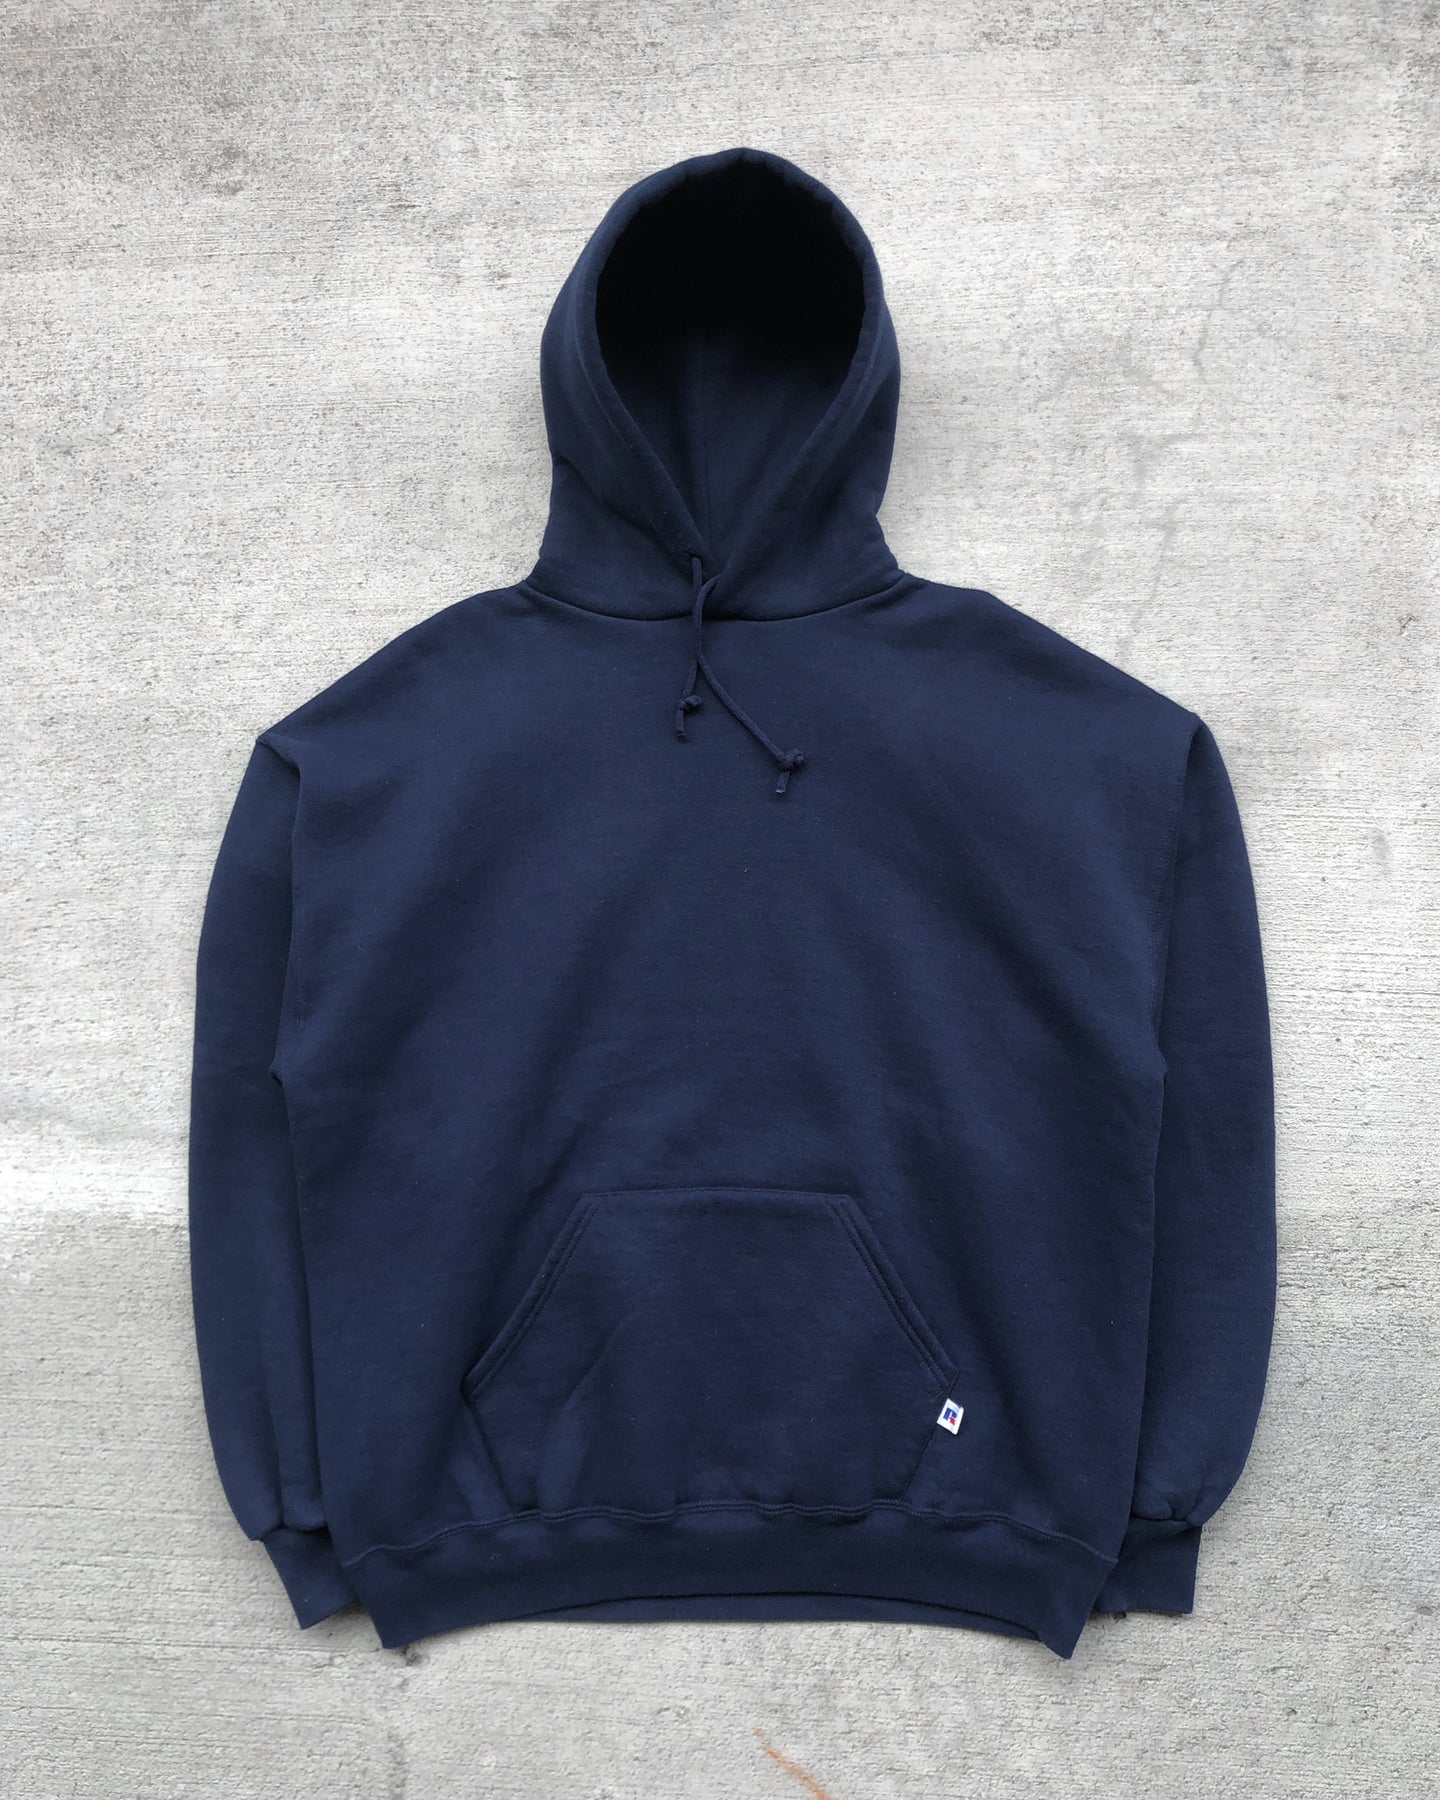 1990s Russell Athletic Navy Hoodie - Size X-Large